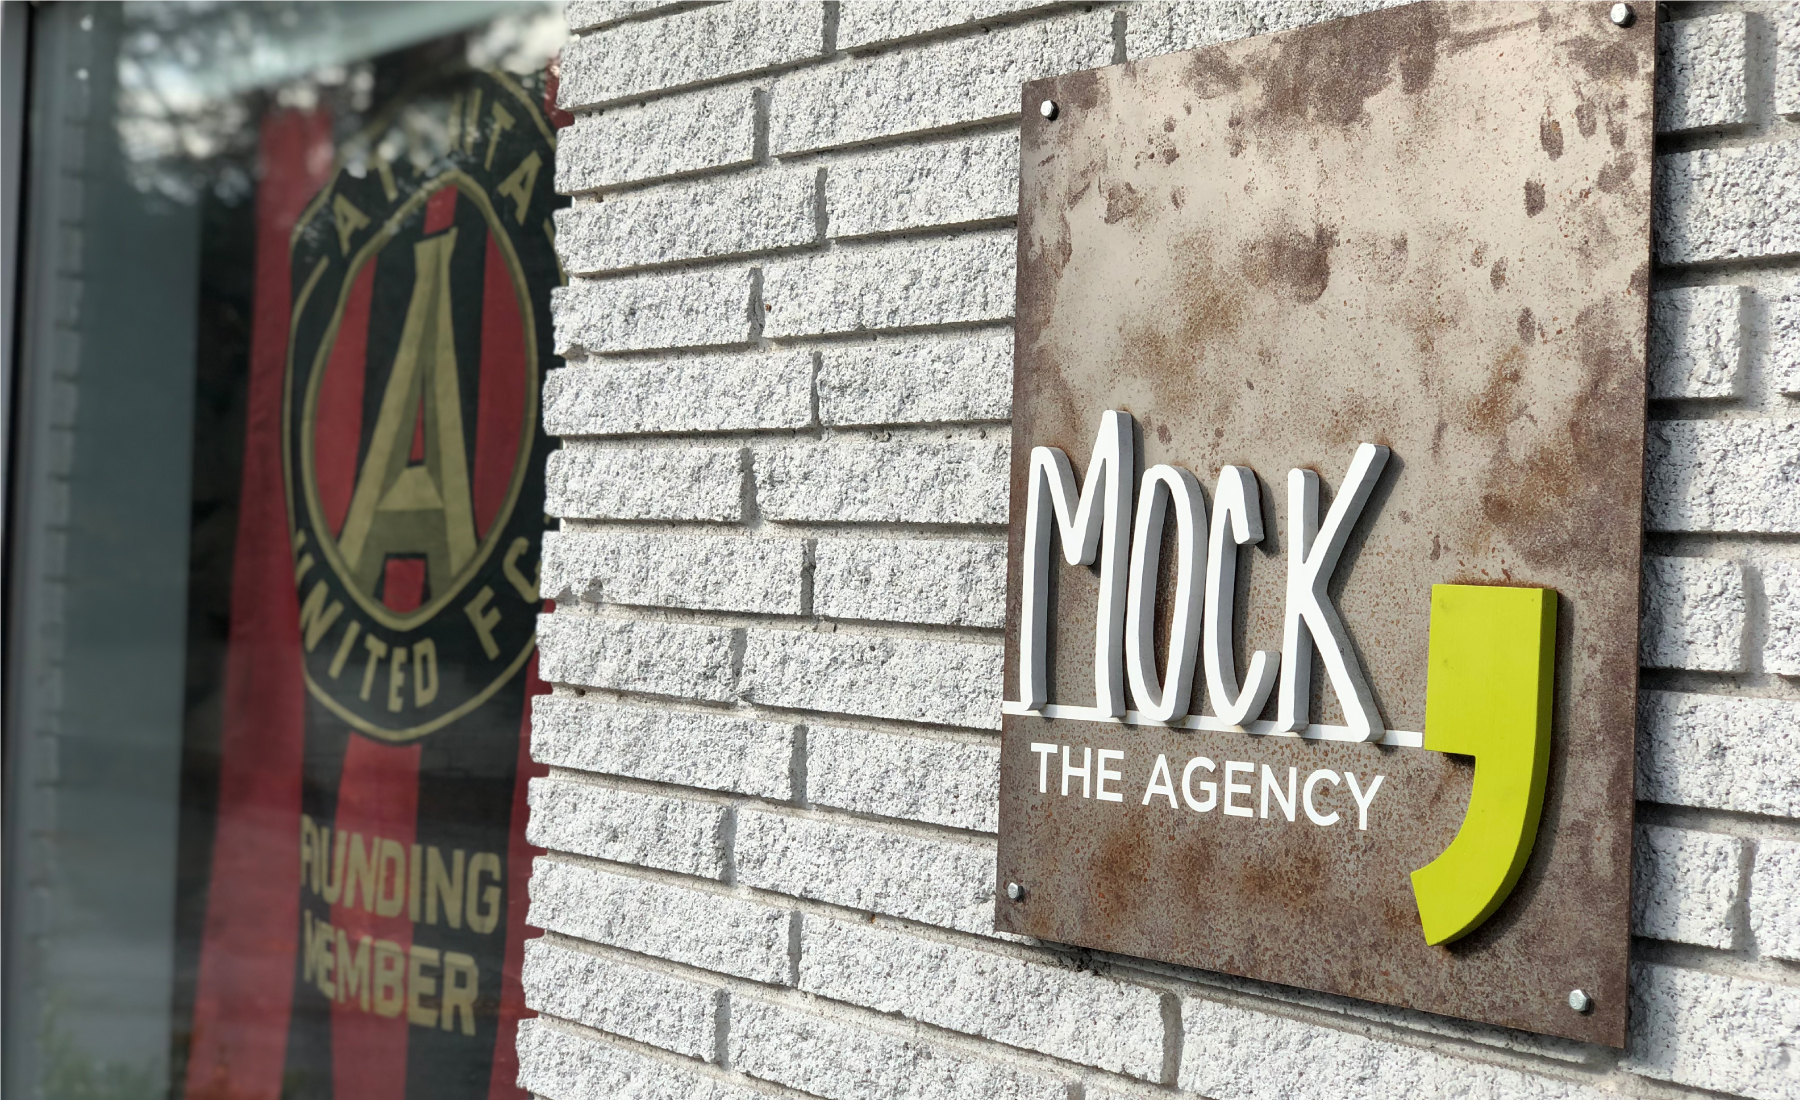 Entrance to MOCK, the agency - a design, advertising, and digital agency.